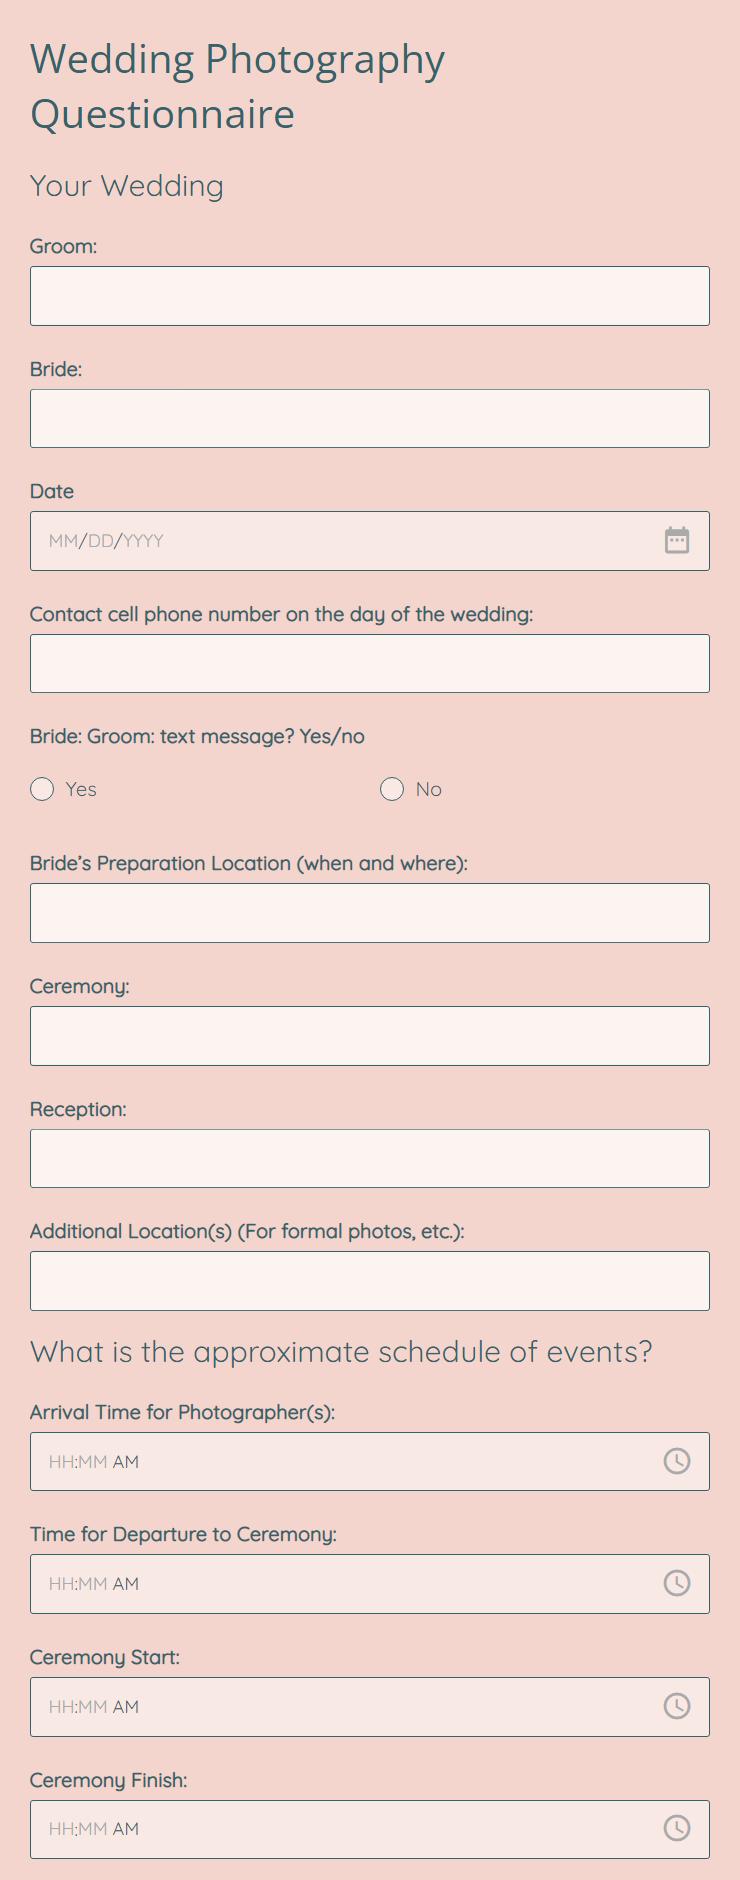 Wedding Photography Questionnaire Template 123FormBuilder